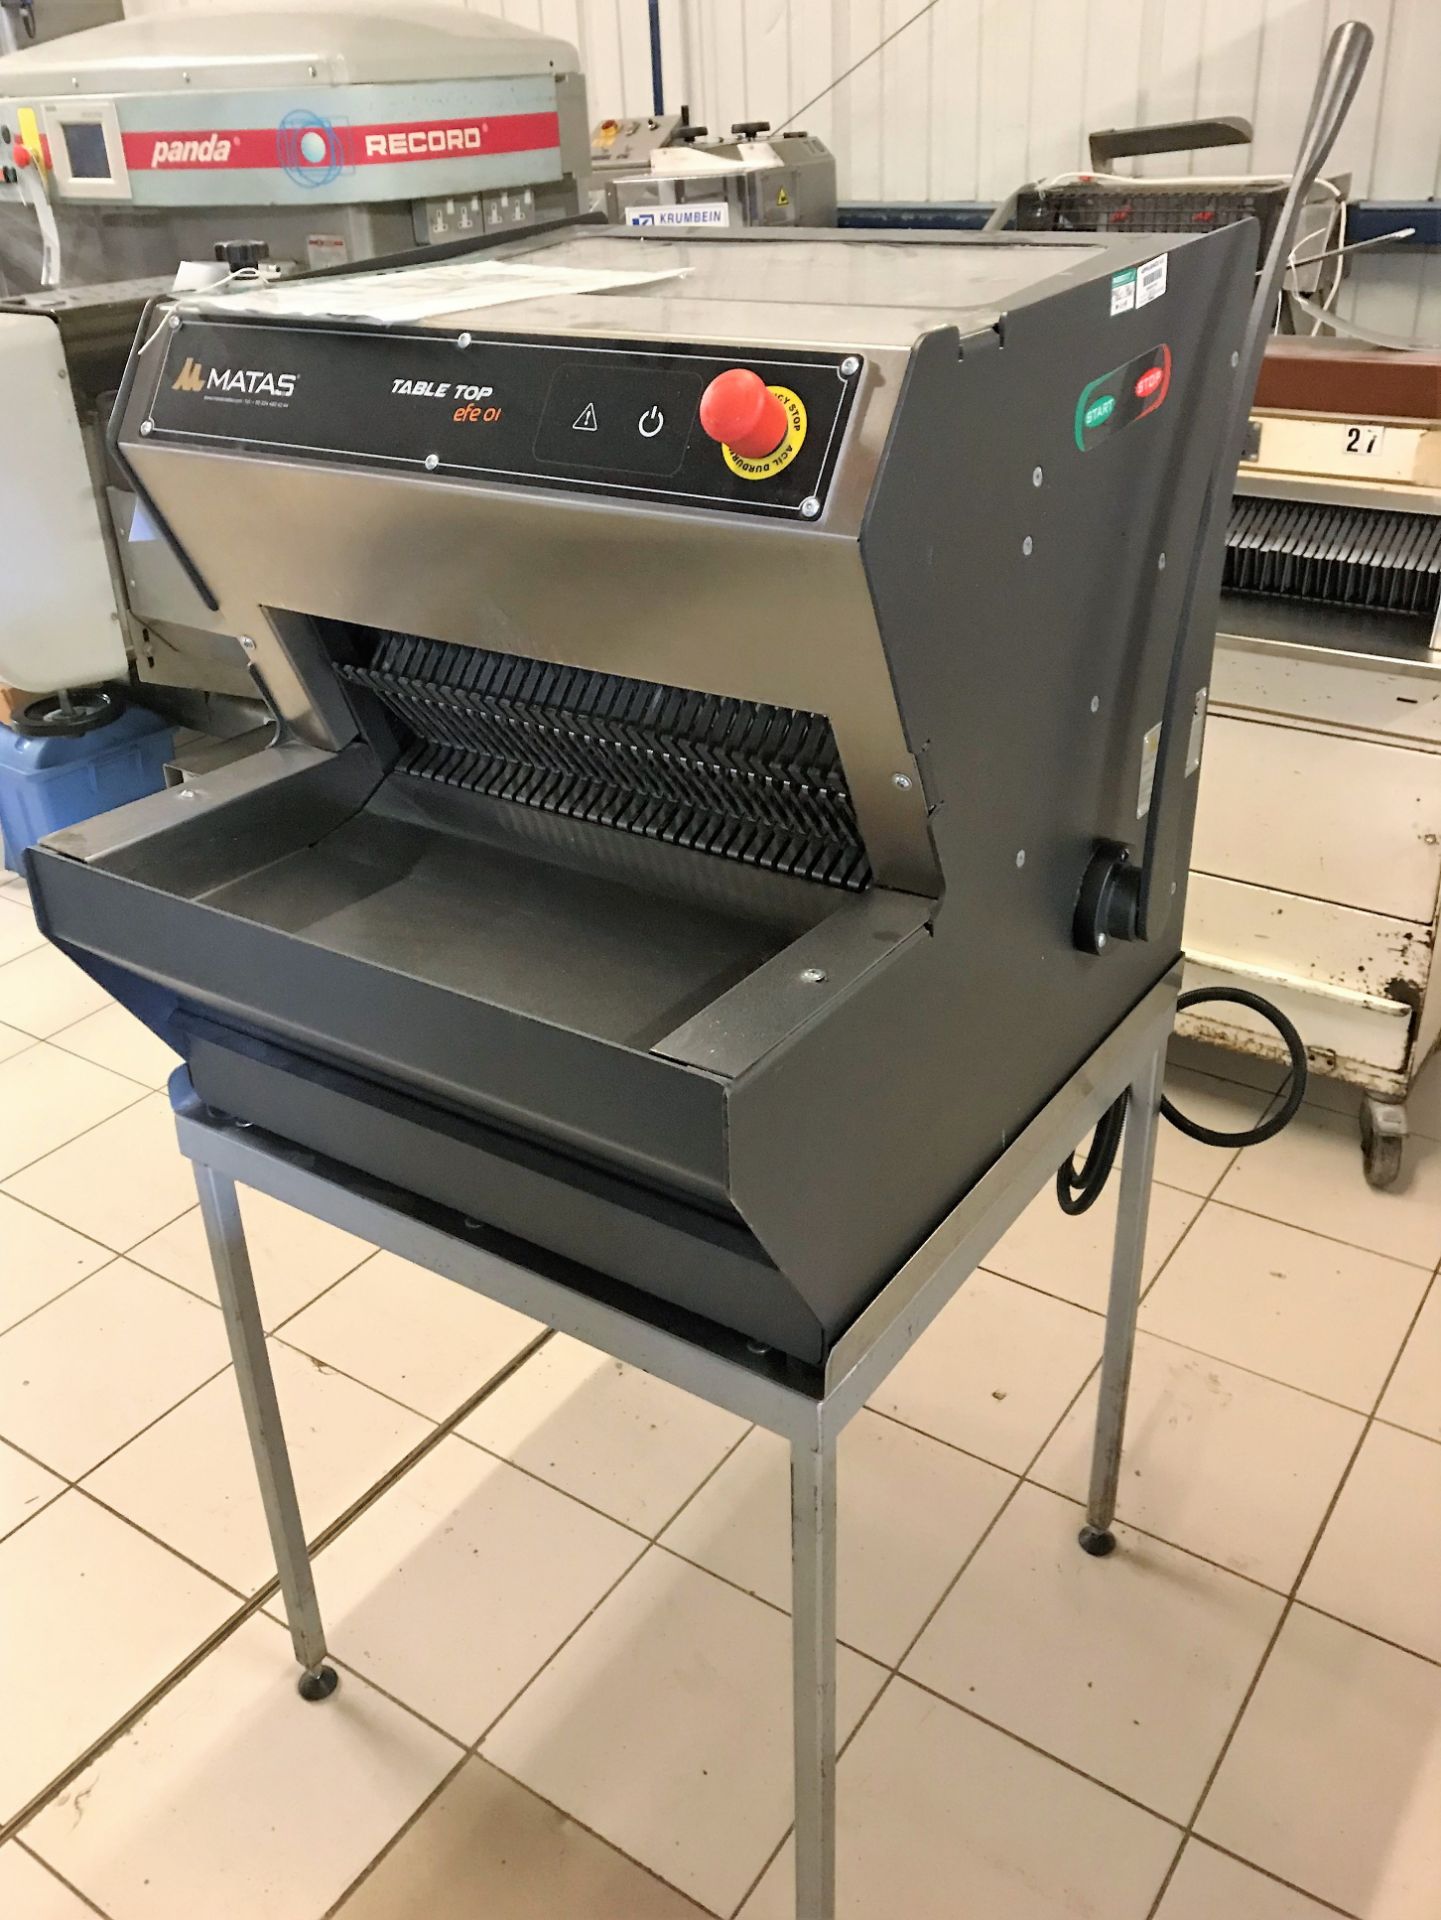 A Matas TABLE TOP efe 01 Sleeved Bread Slicing Machine and Stand No.17681 (12/2017), 1ph, 480mm w. - Image 2 of 3